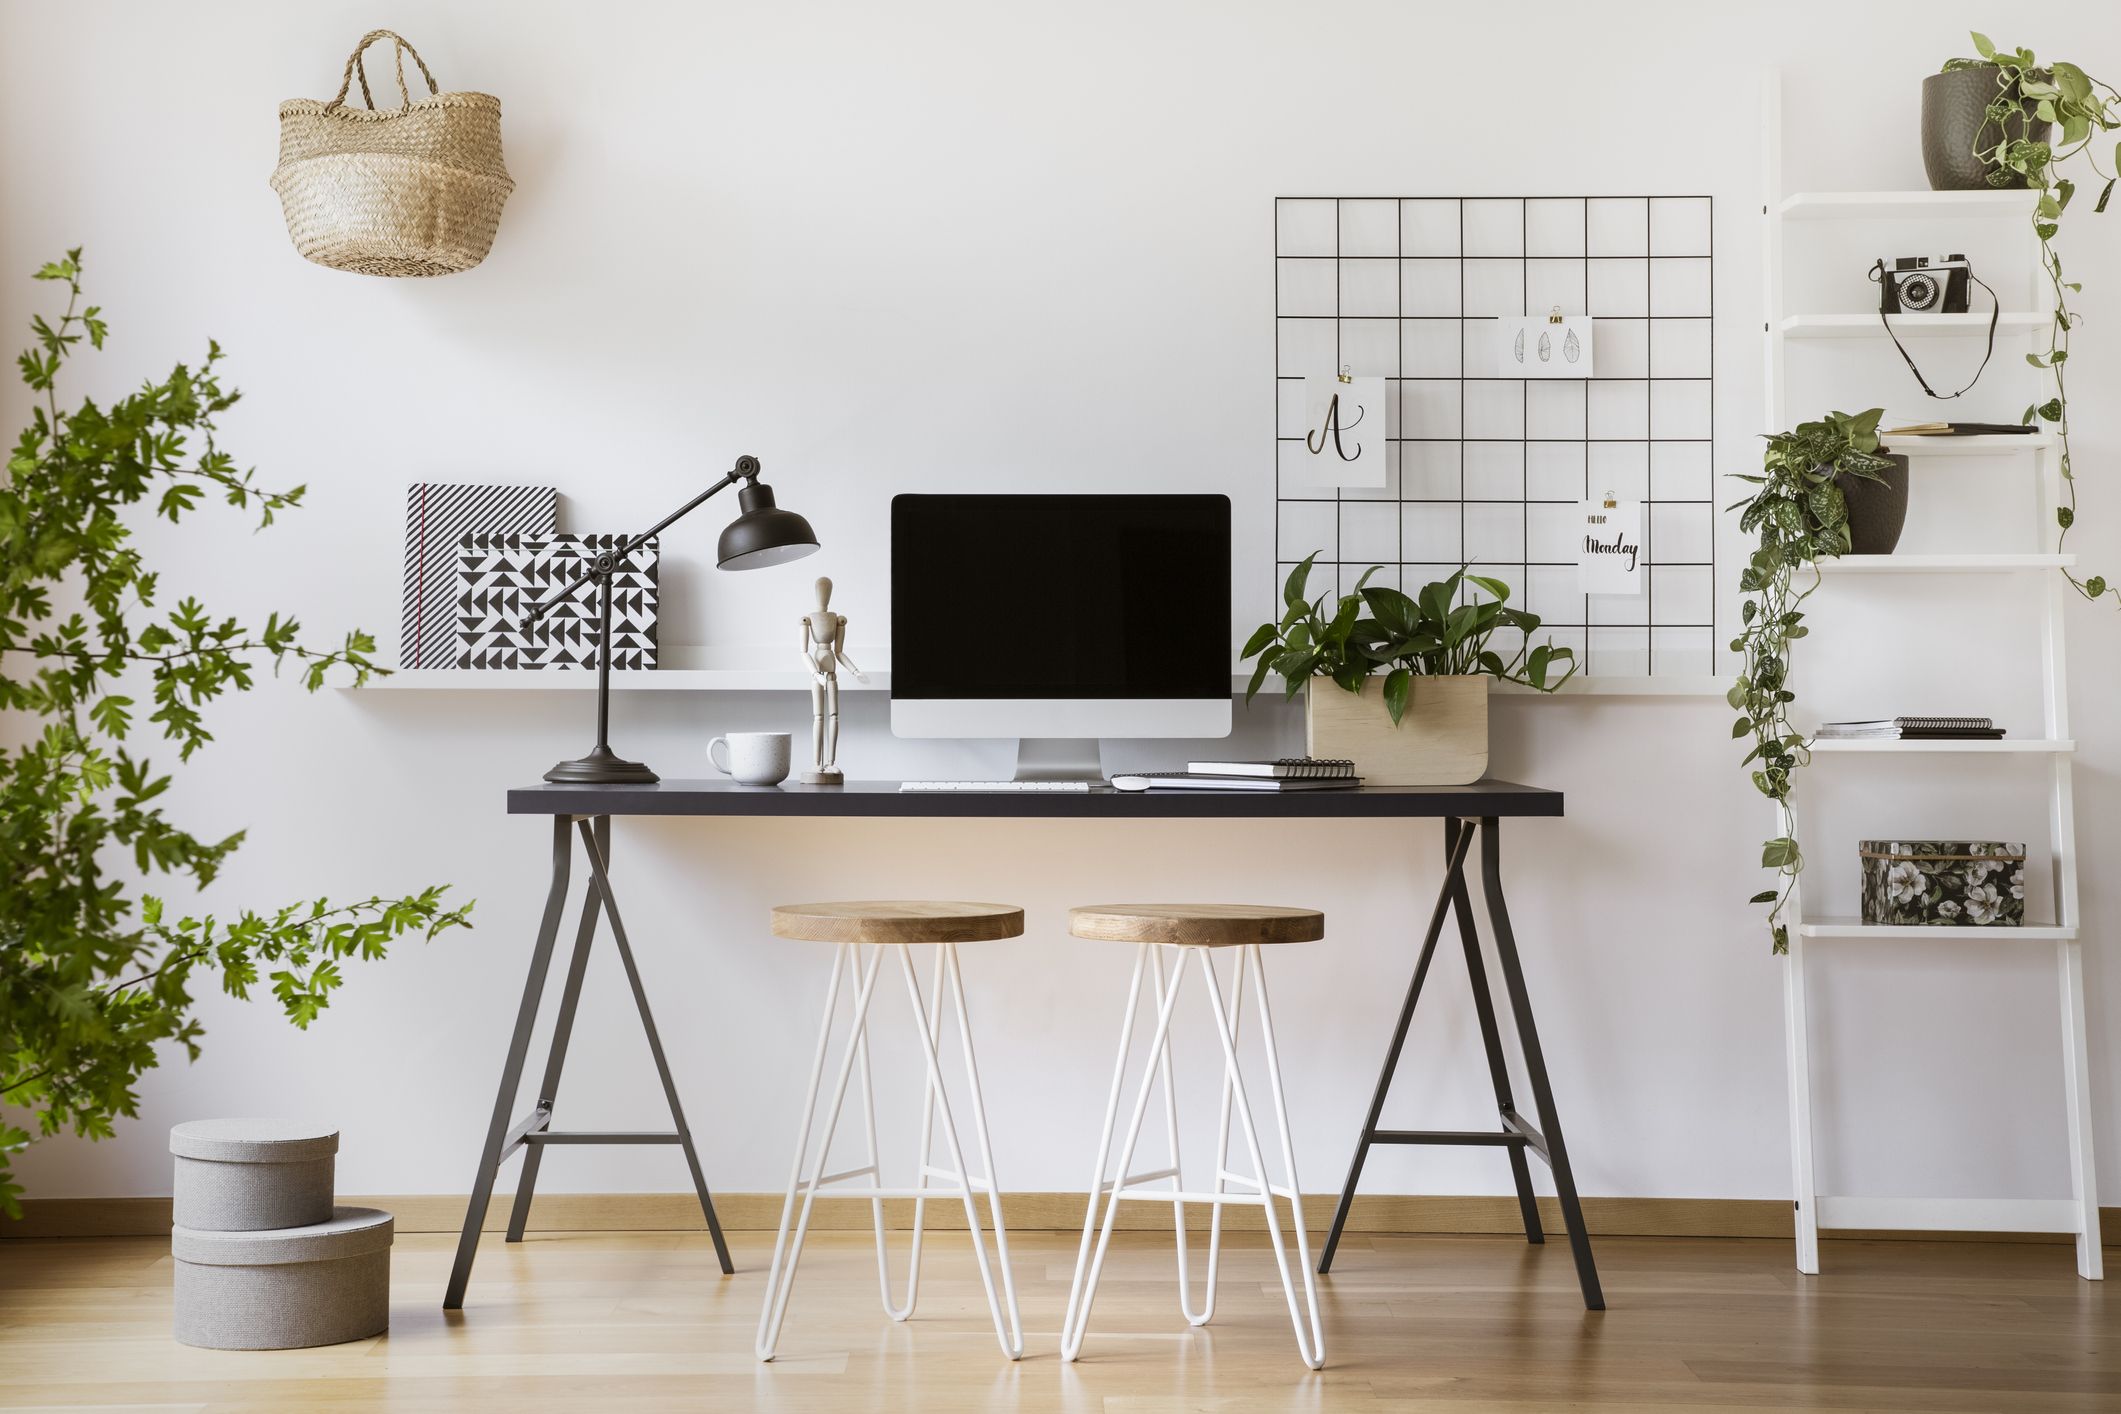 5 Easy Tricks You Can Use to Update Your Office Space on a Budget